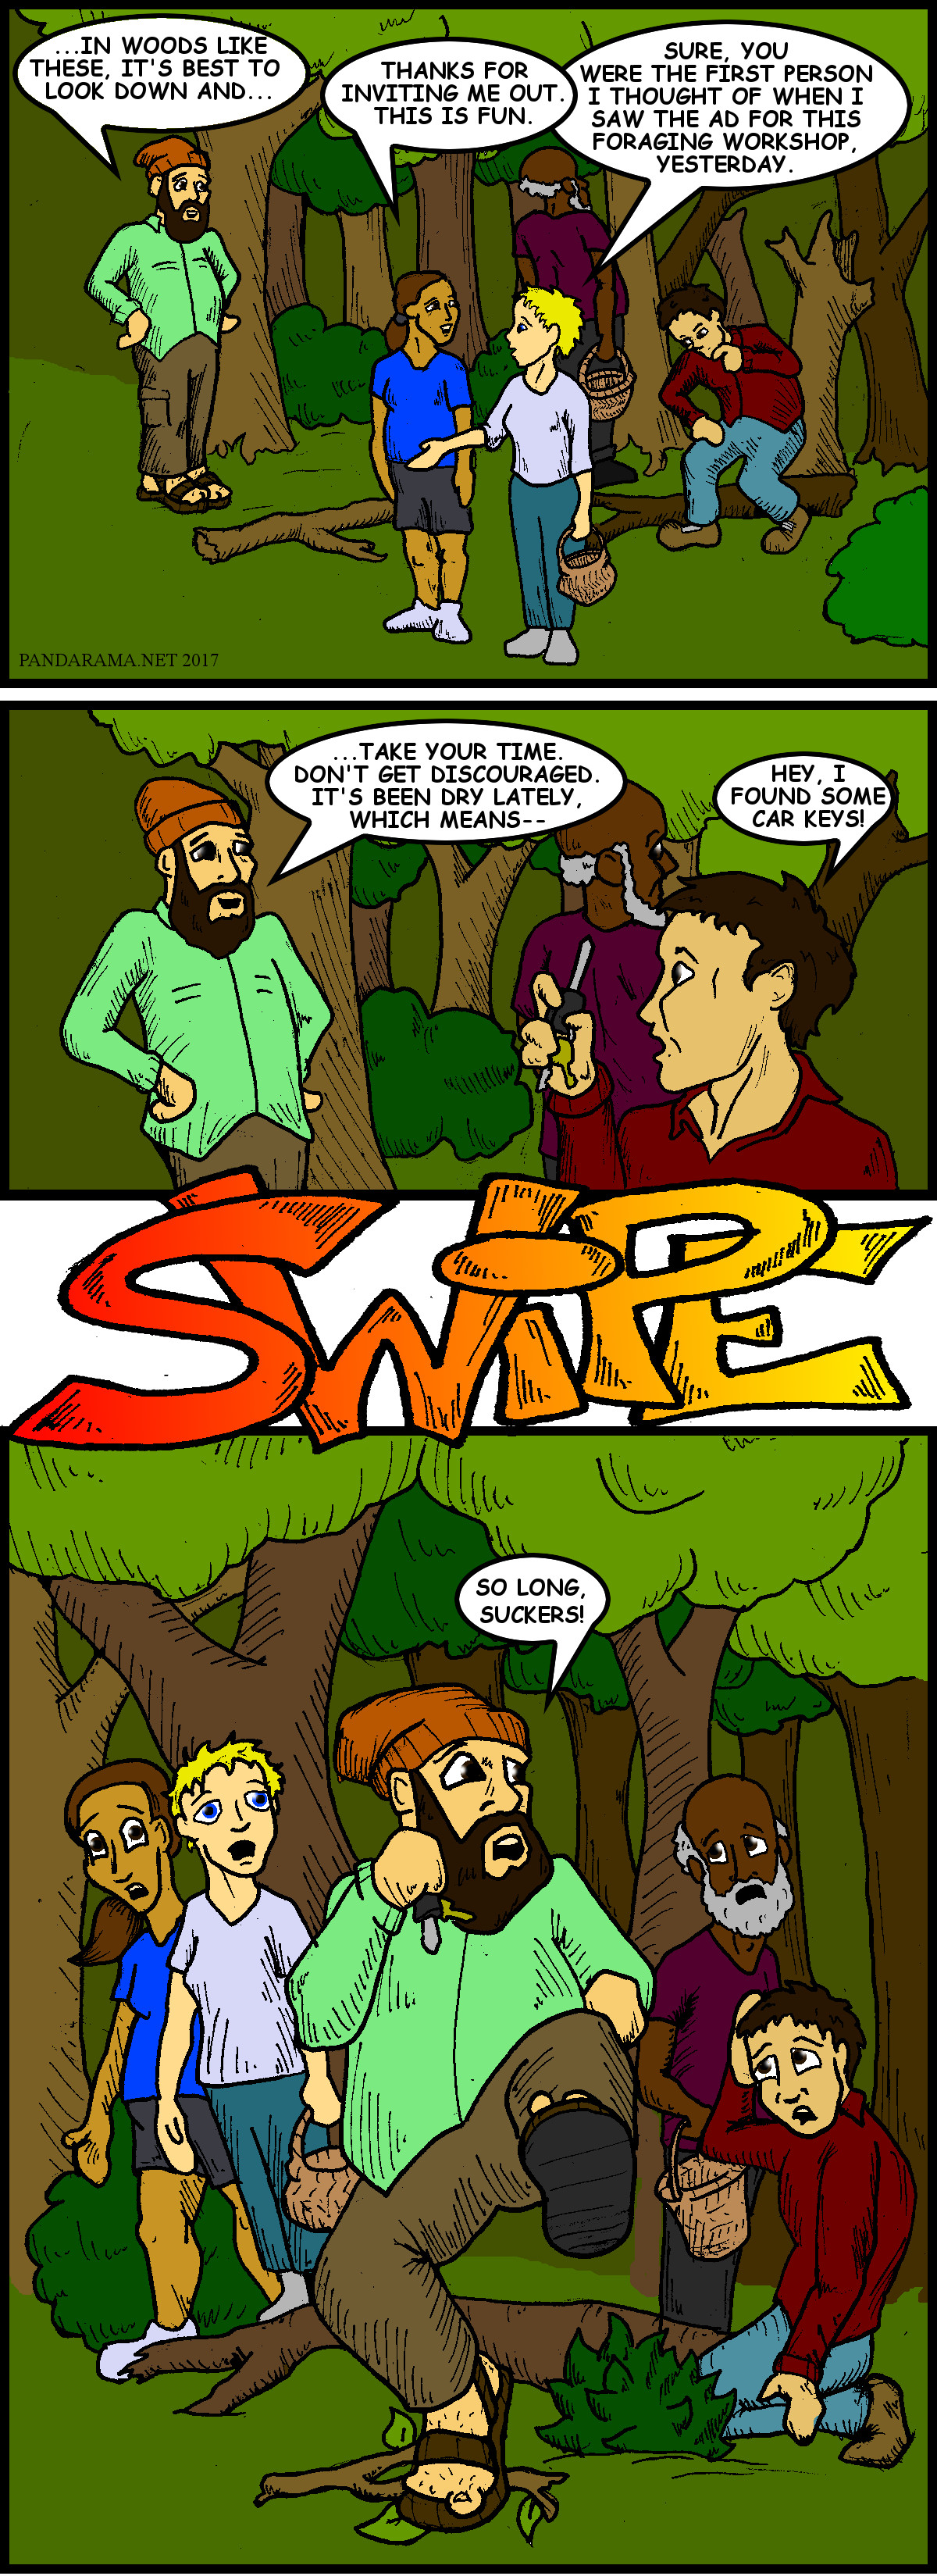 webcomic where mushroom foraging class teacher is actually tricking people into looking for his lost car keys.